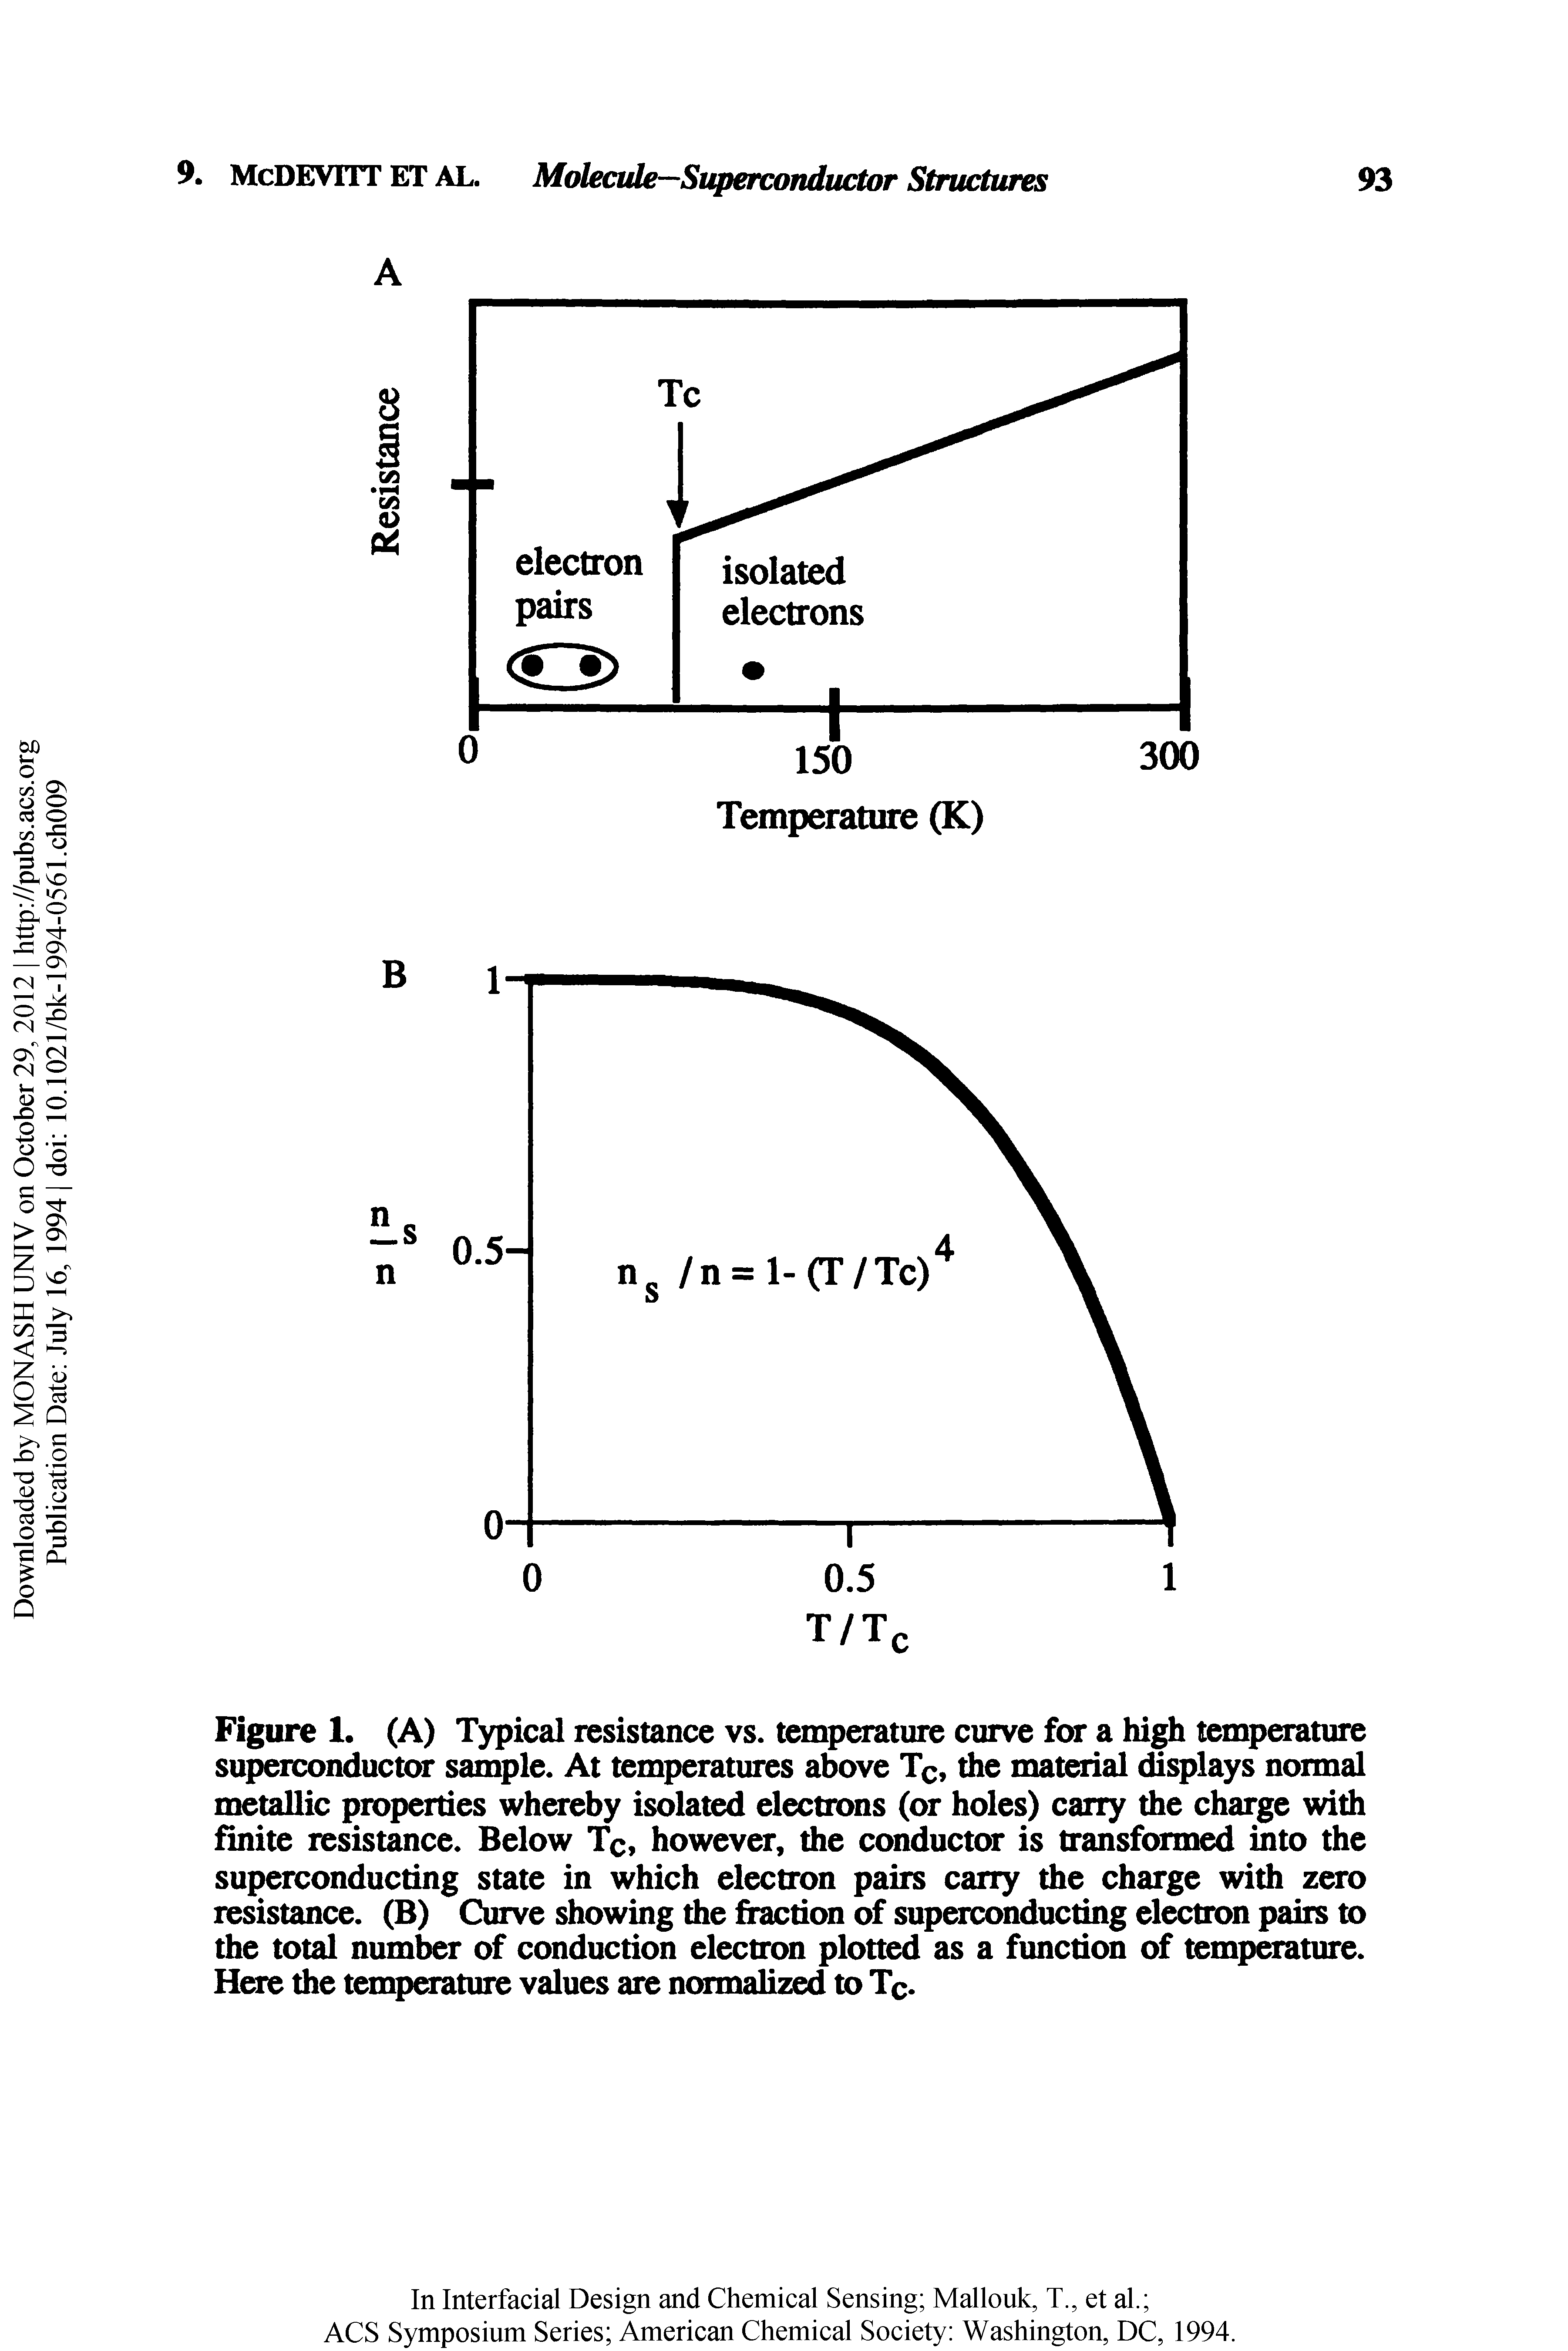 Figure 1. (A) Typical resistance vs. temperature curve for a high temperature superconductor sample. At temperatures above Tq, the material displays normal metallic properties whereby isolated electrons (or holes) carry the charge with finite resistance. Below Tc, however, the conductor is transformed into the superconducting state in which electron pairs carry the charge with zero resistance. (B) Curve showing the fraction of superconducting electron pairs to the total number of conduction electron plotted as a function of temperature. Here the temperature values are normalized to Tc.